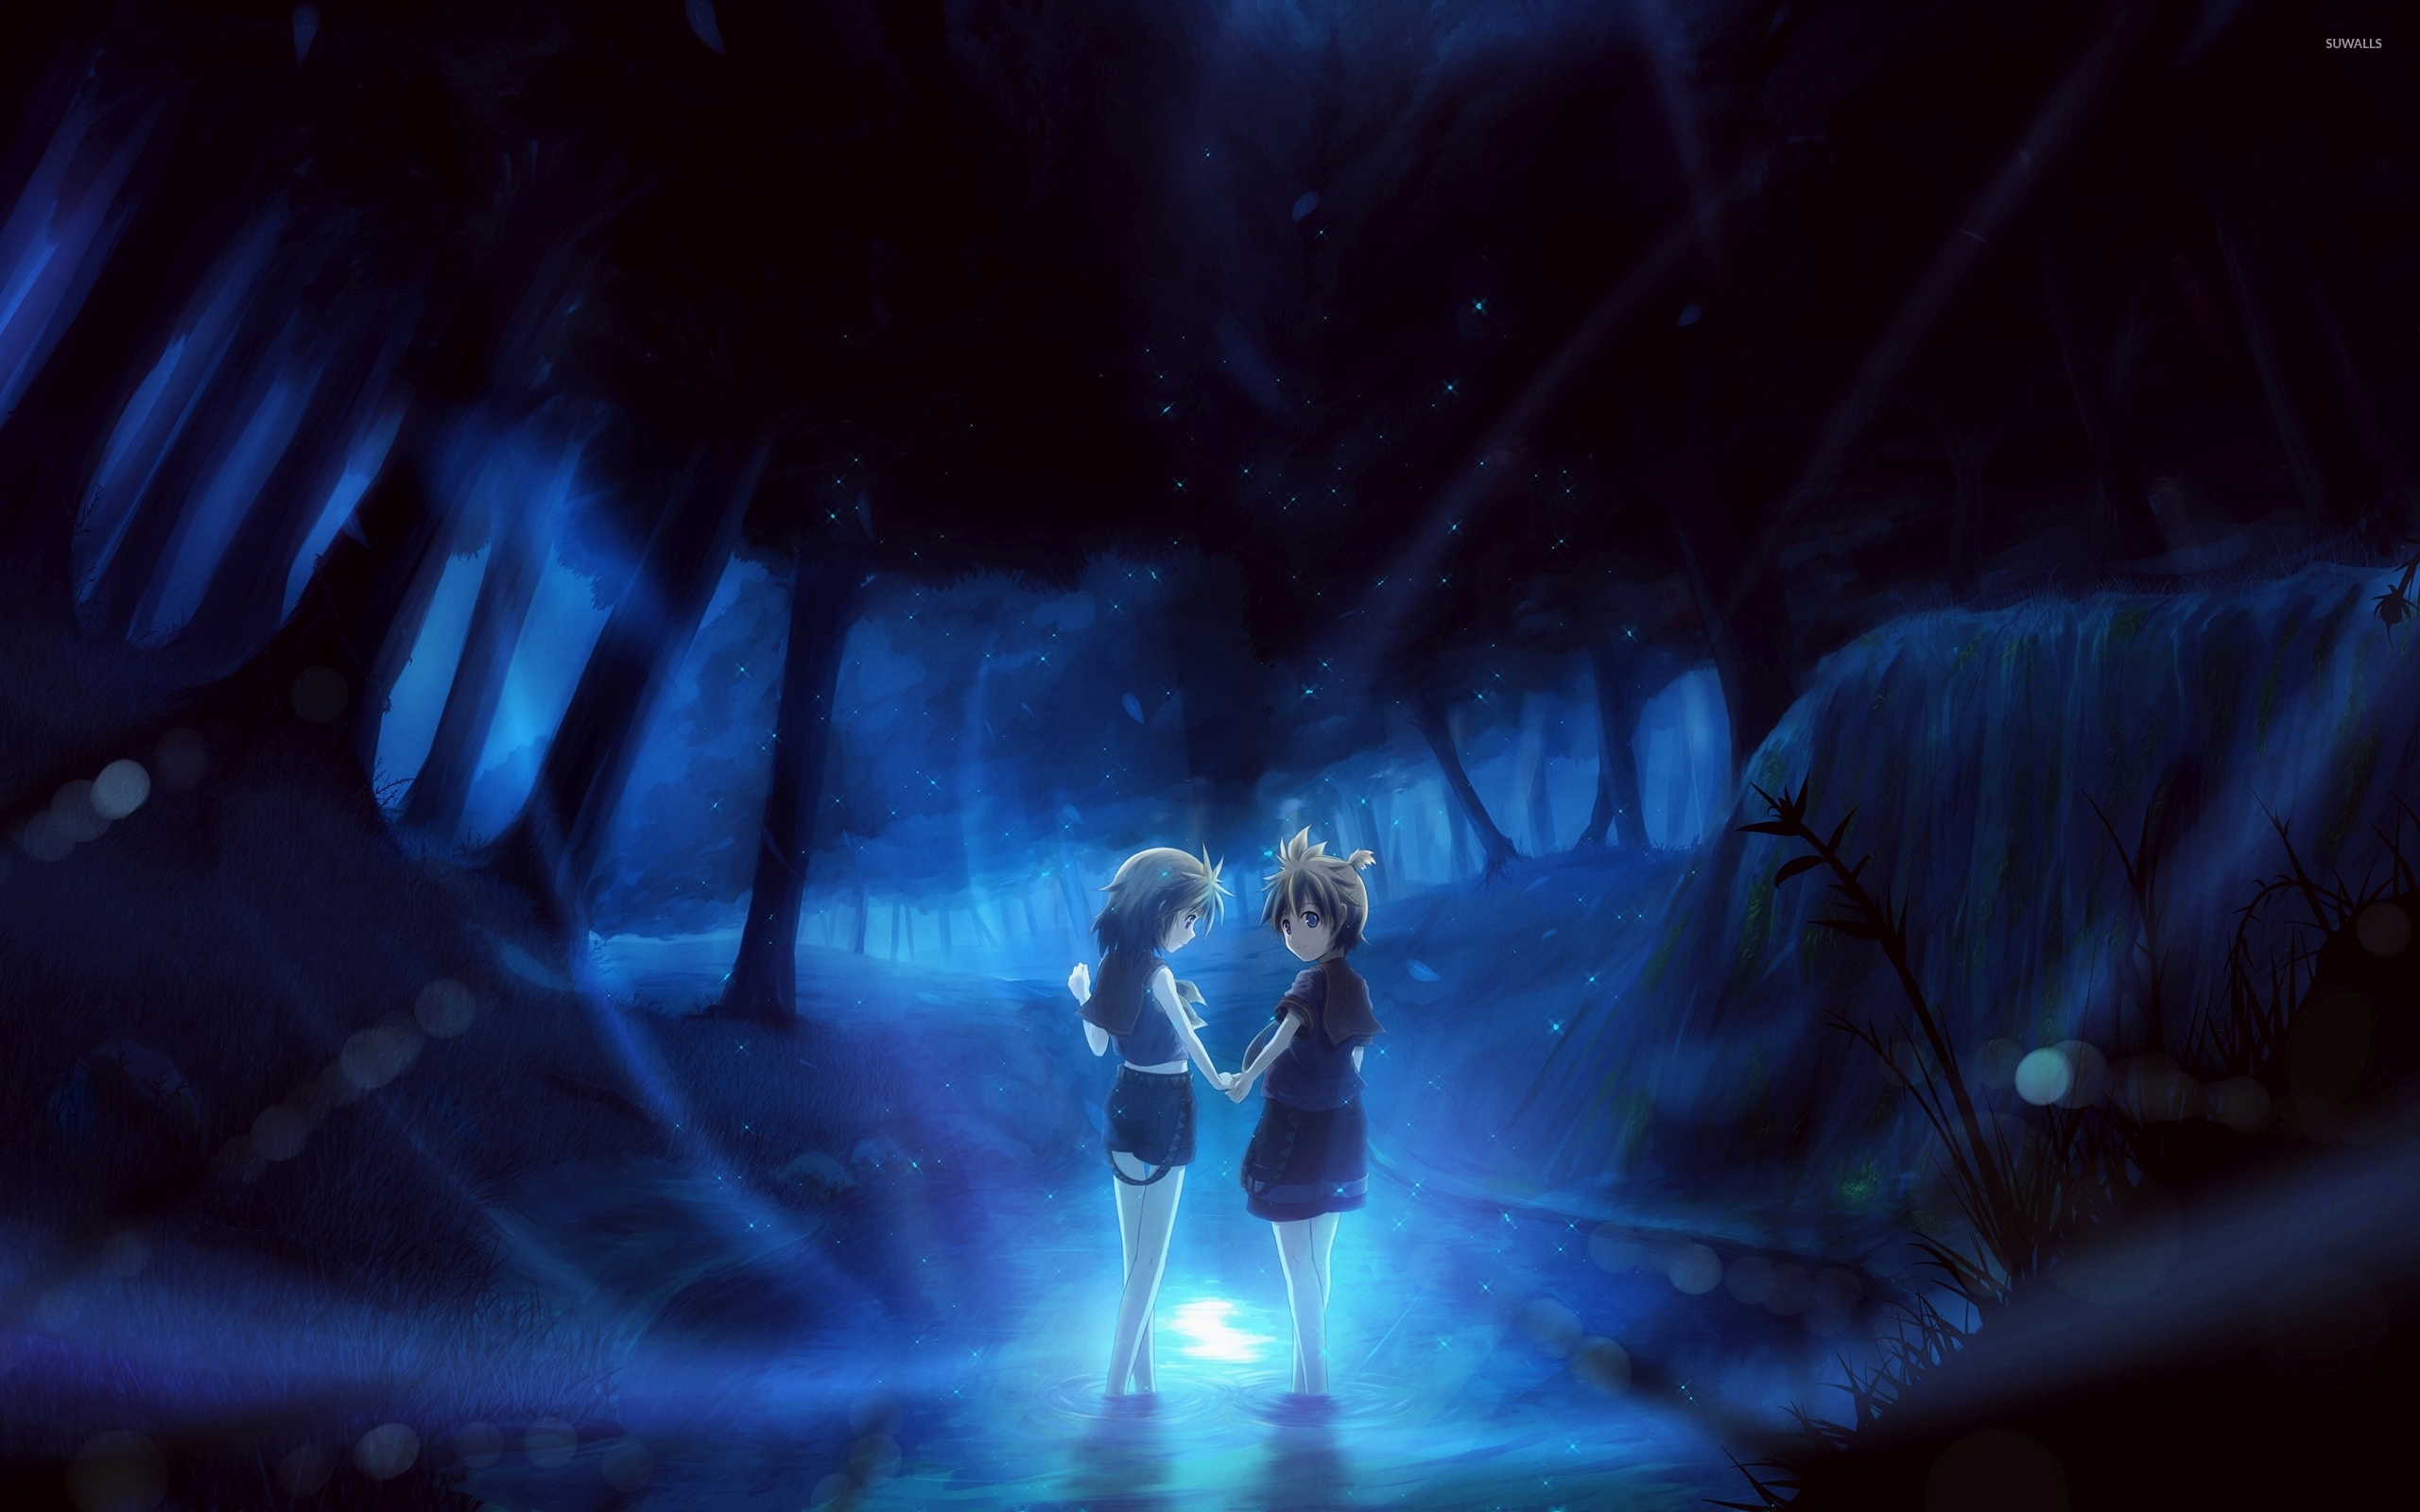 Anime Dark Forest Wallpapers